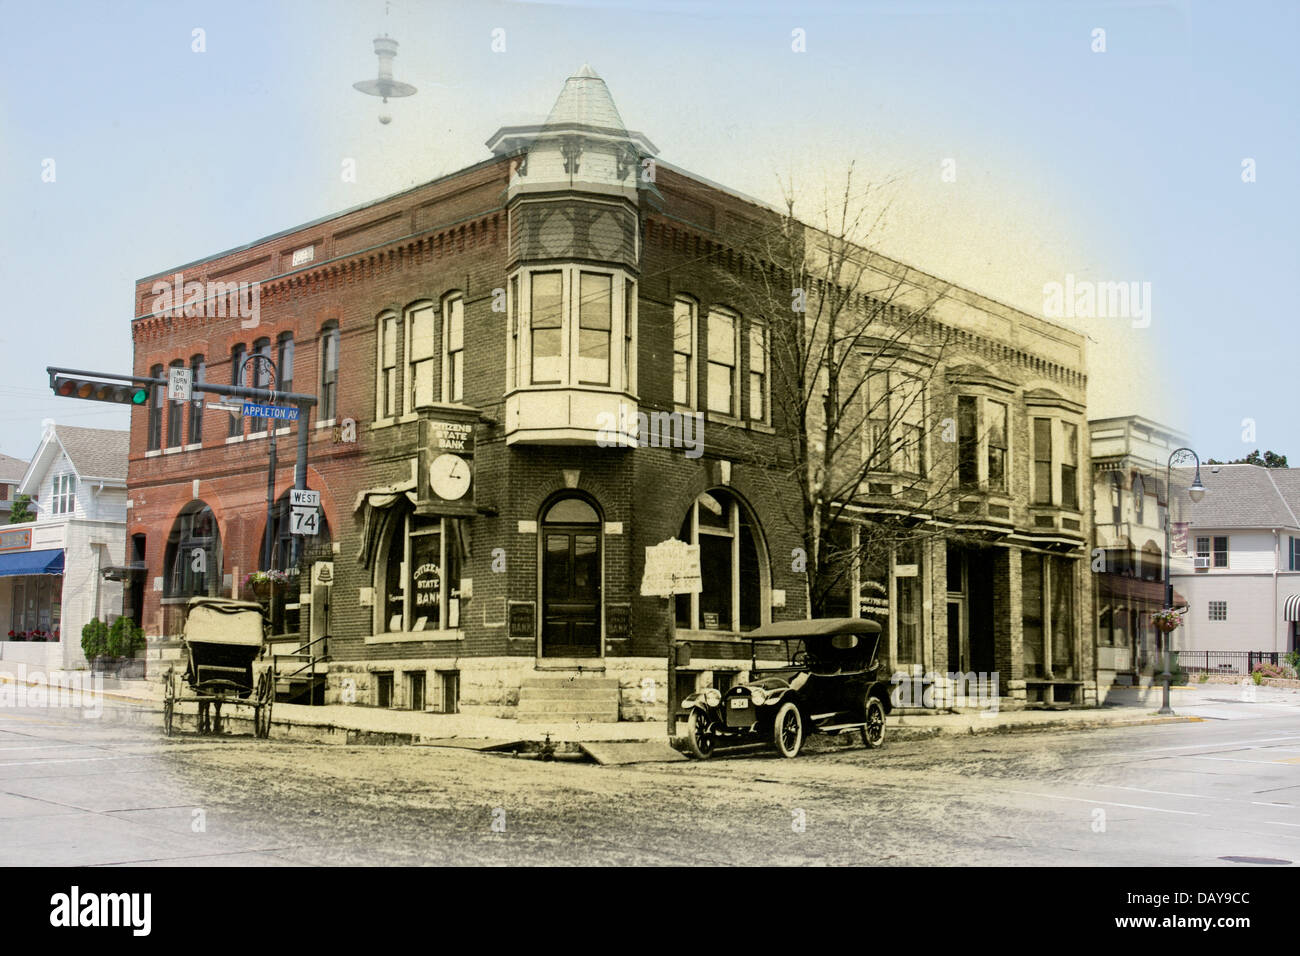 Composite image of the Bank of Memories Flower shop and the old image of the Citizens State Bank in early 1900s Menomonee Falls Stock Photo